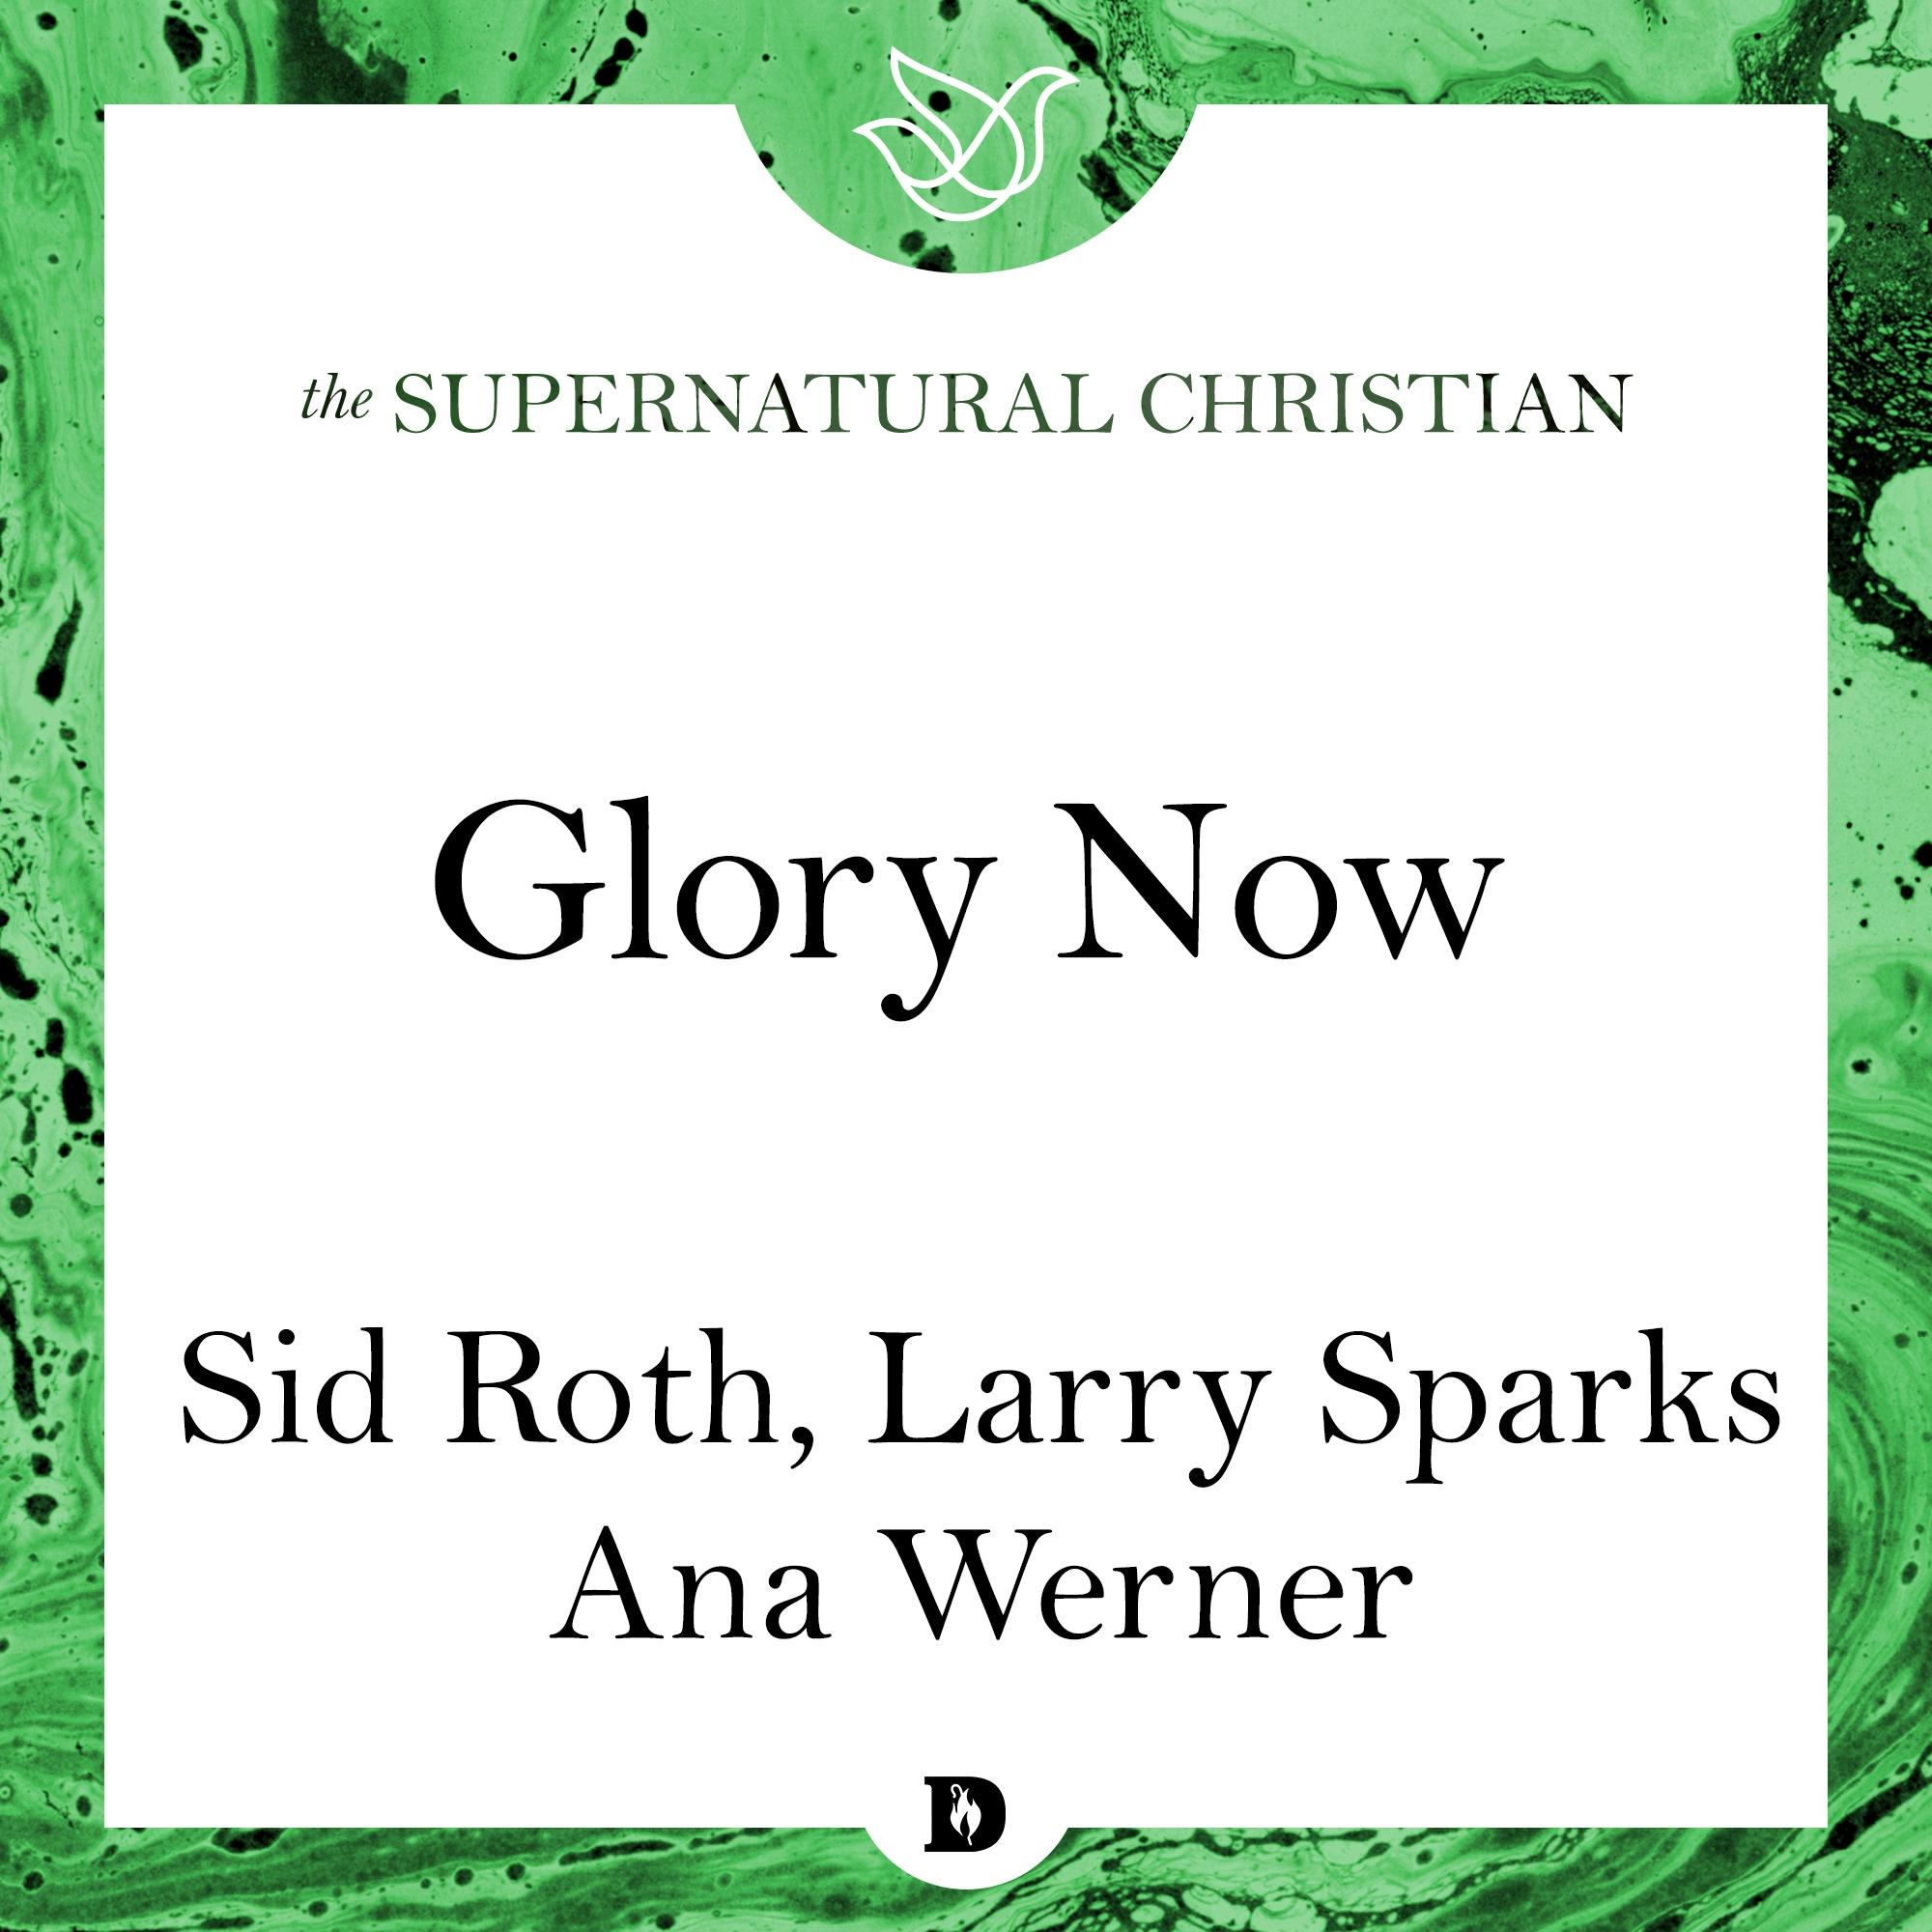 Glory Now: A Feature Teaching From Accessing the Greater Glory - Larry Sparks, Ana Werner, Sid Roth